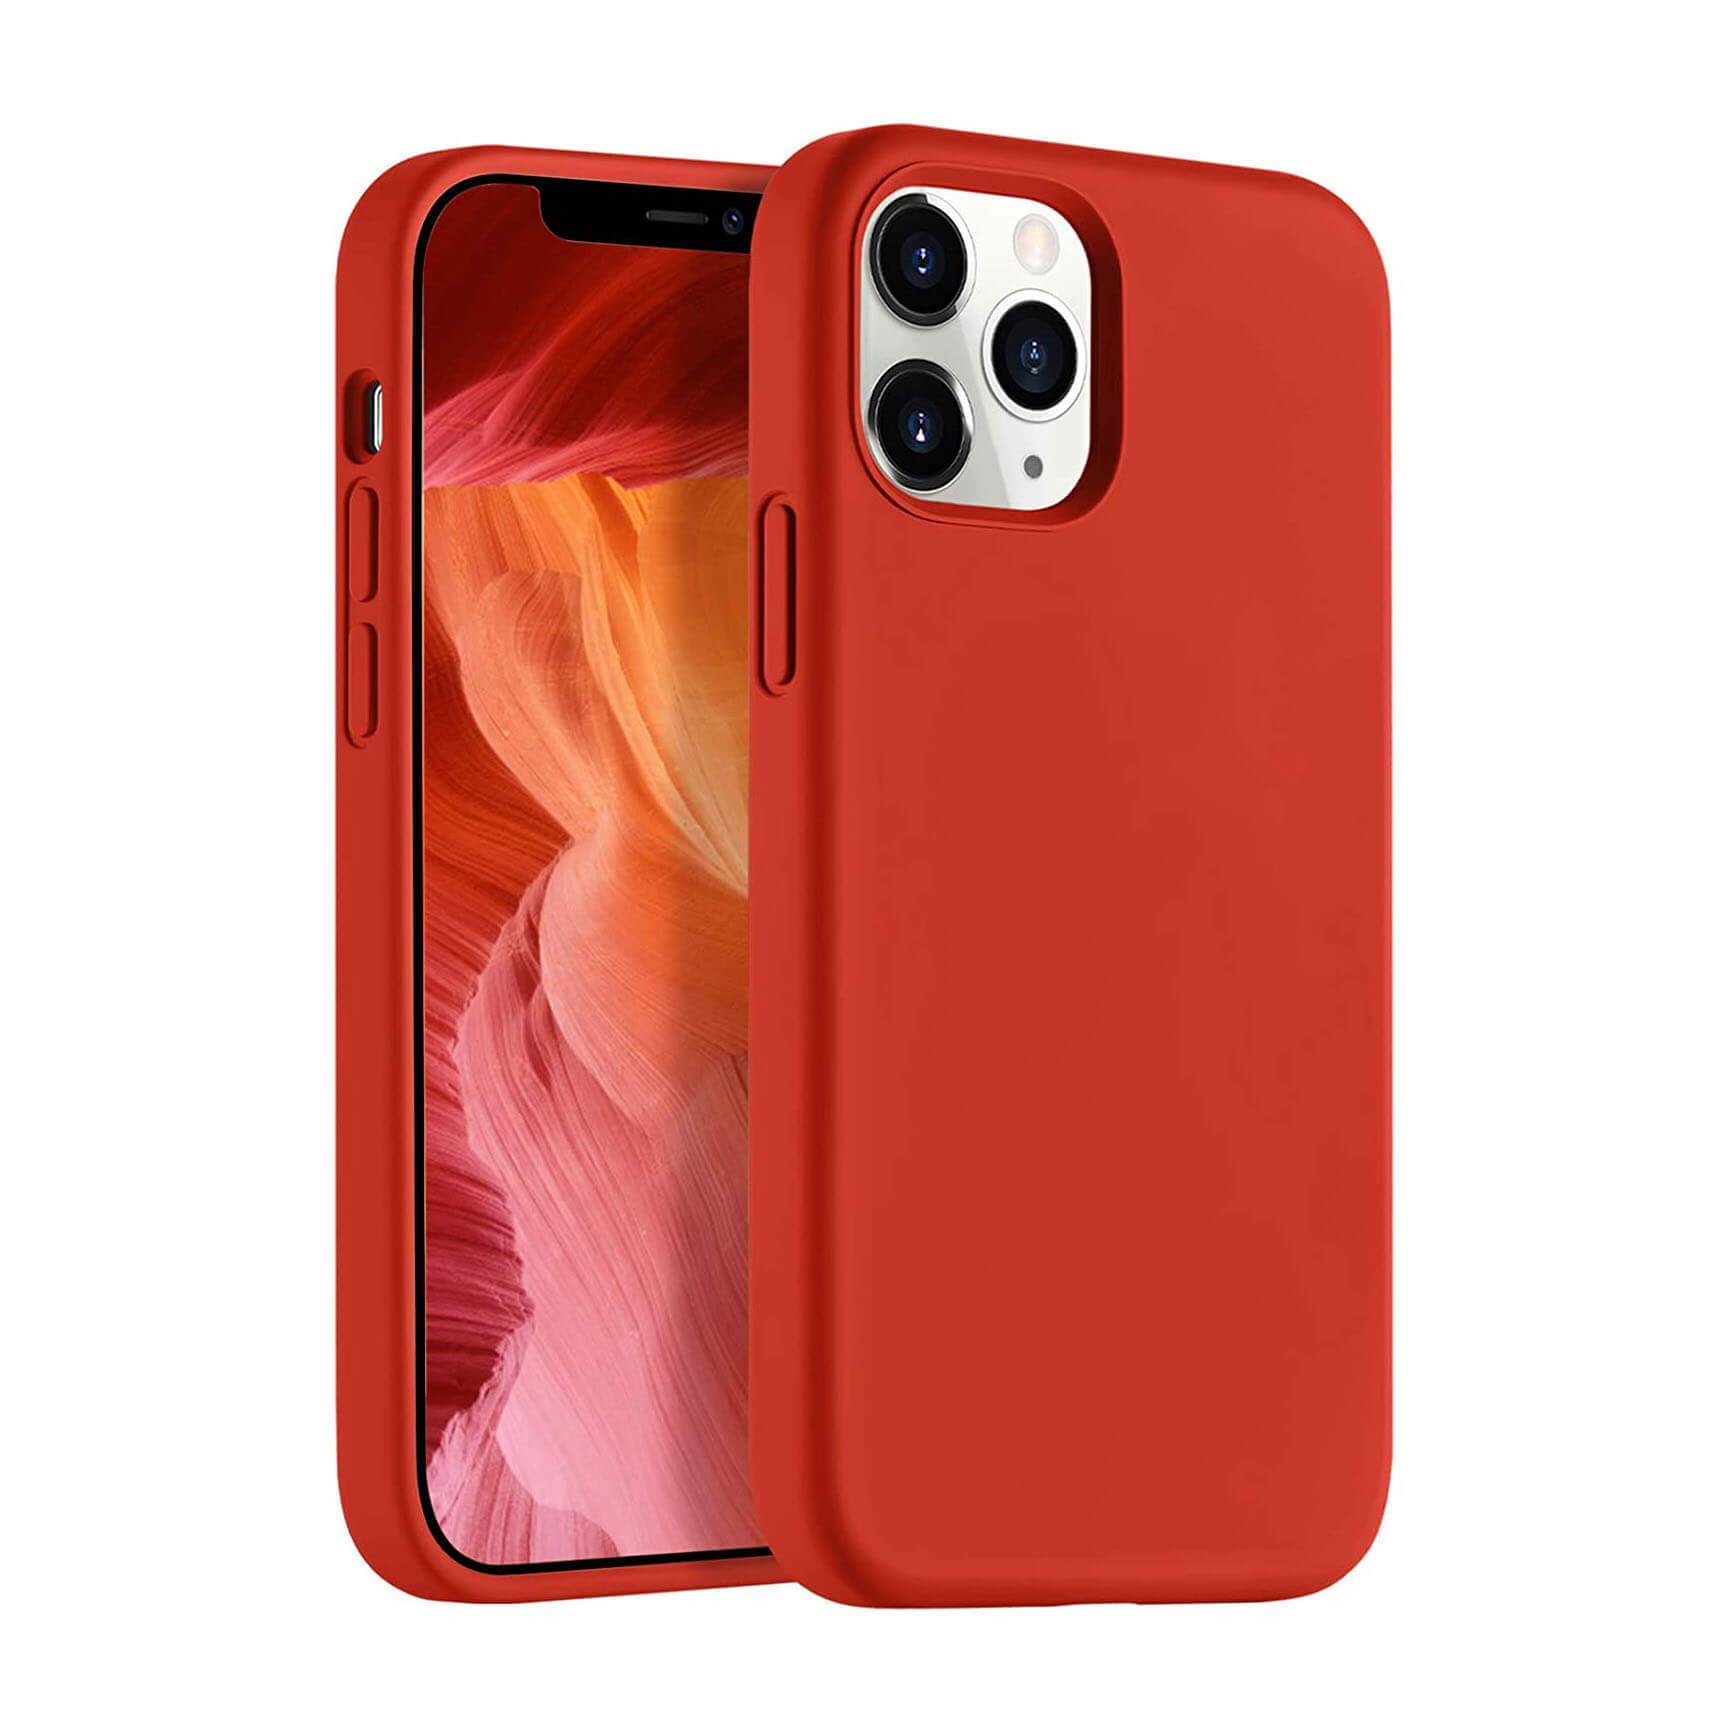 Liquid Silicone Case For Apple iPhone 12 Pro Max Luxury Thin Phone Cover Red